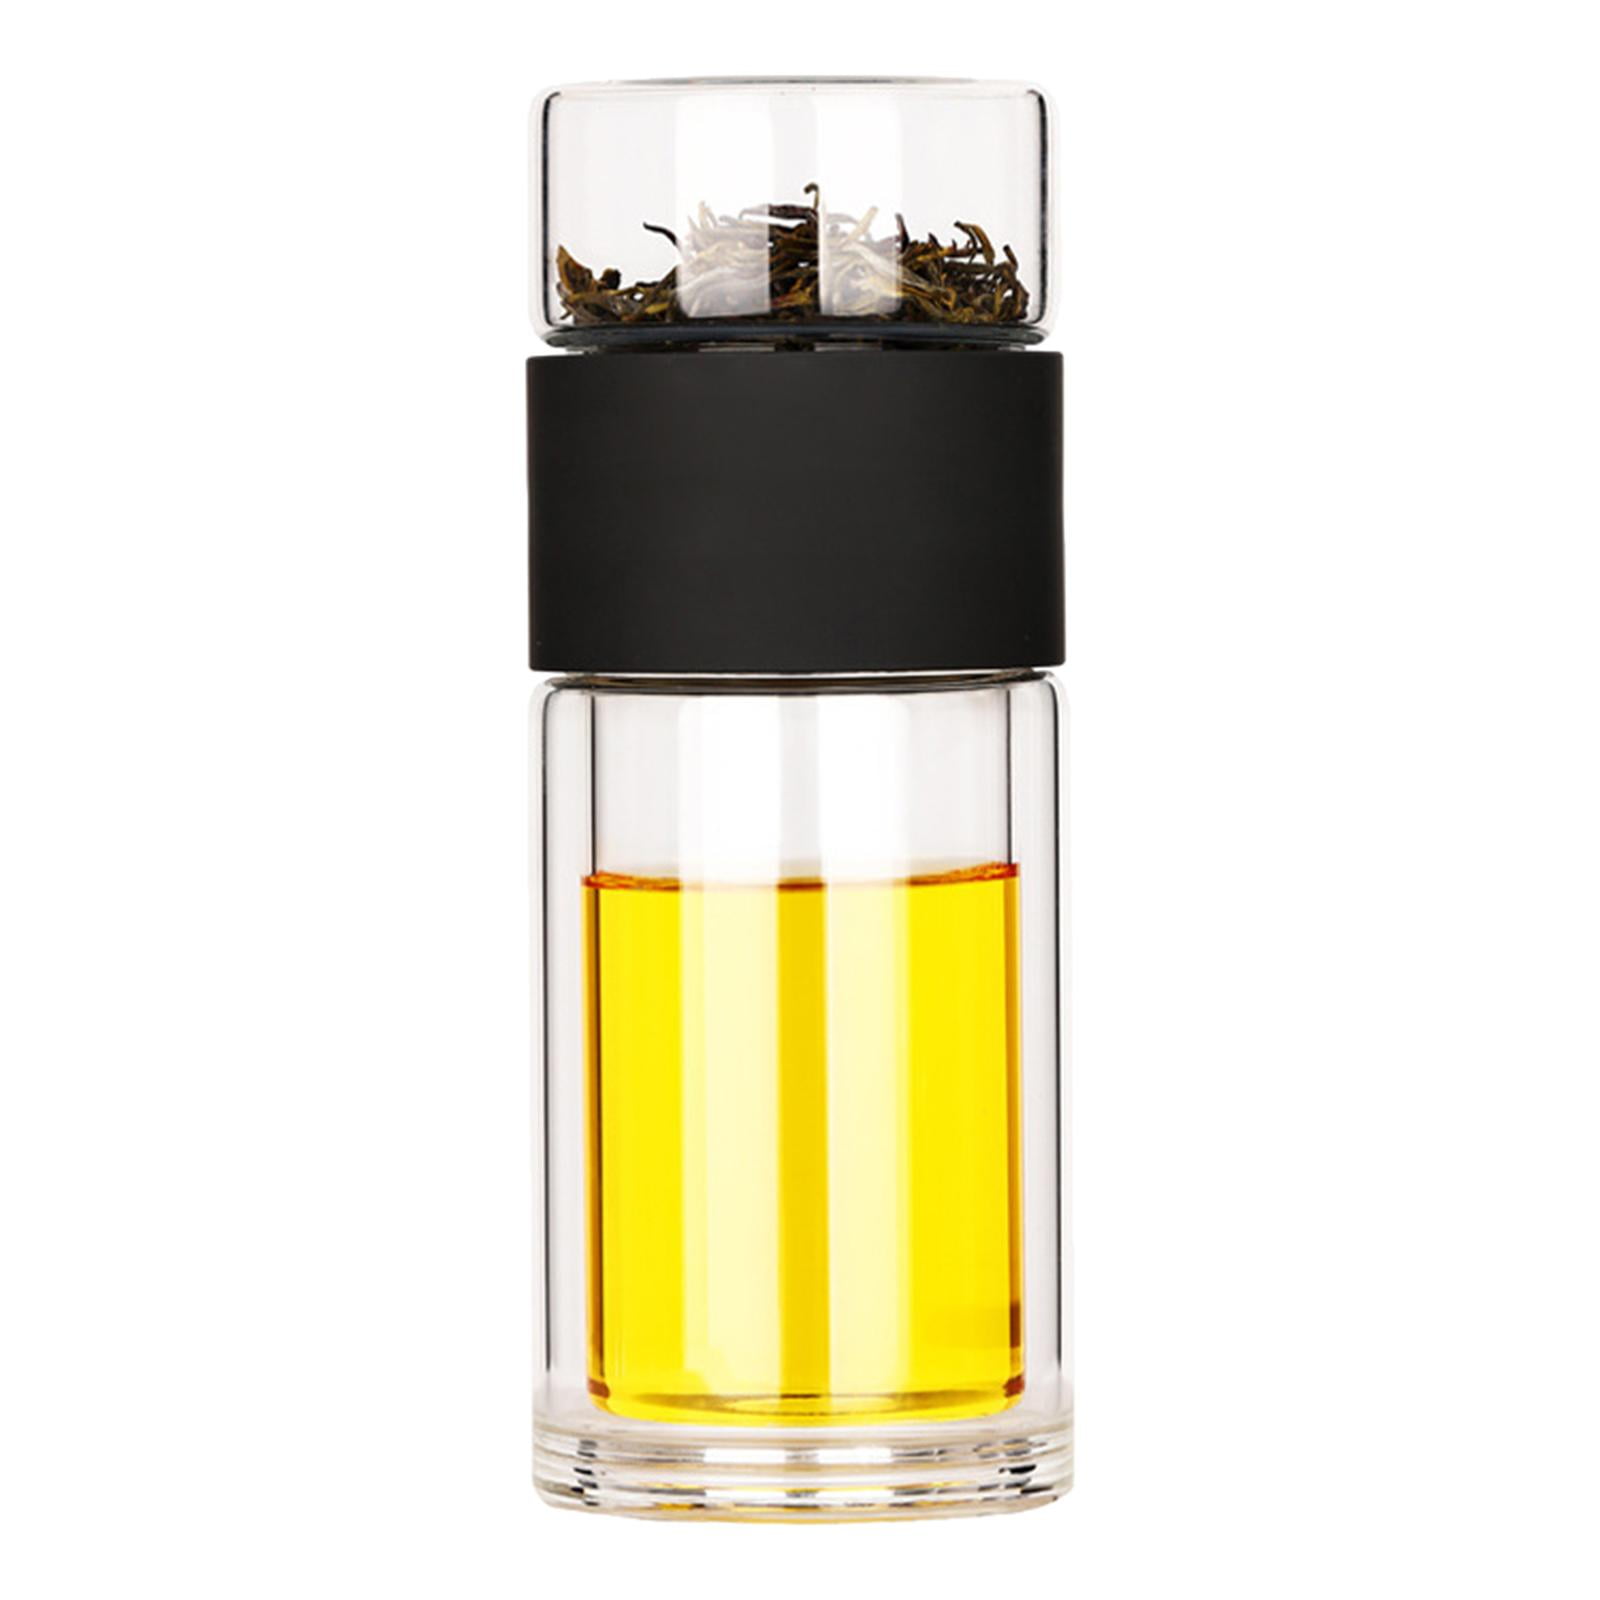 Tea Brewing Cup Liquid Solution Travel Tumbler Stainless Infuser Loose Leaf  Tea